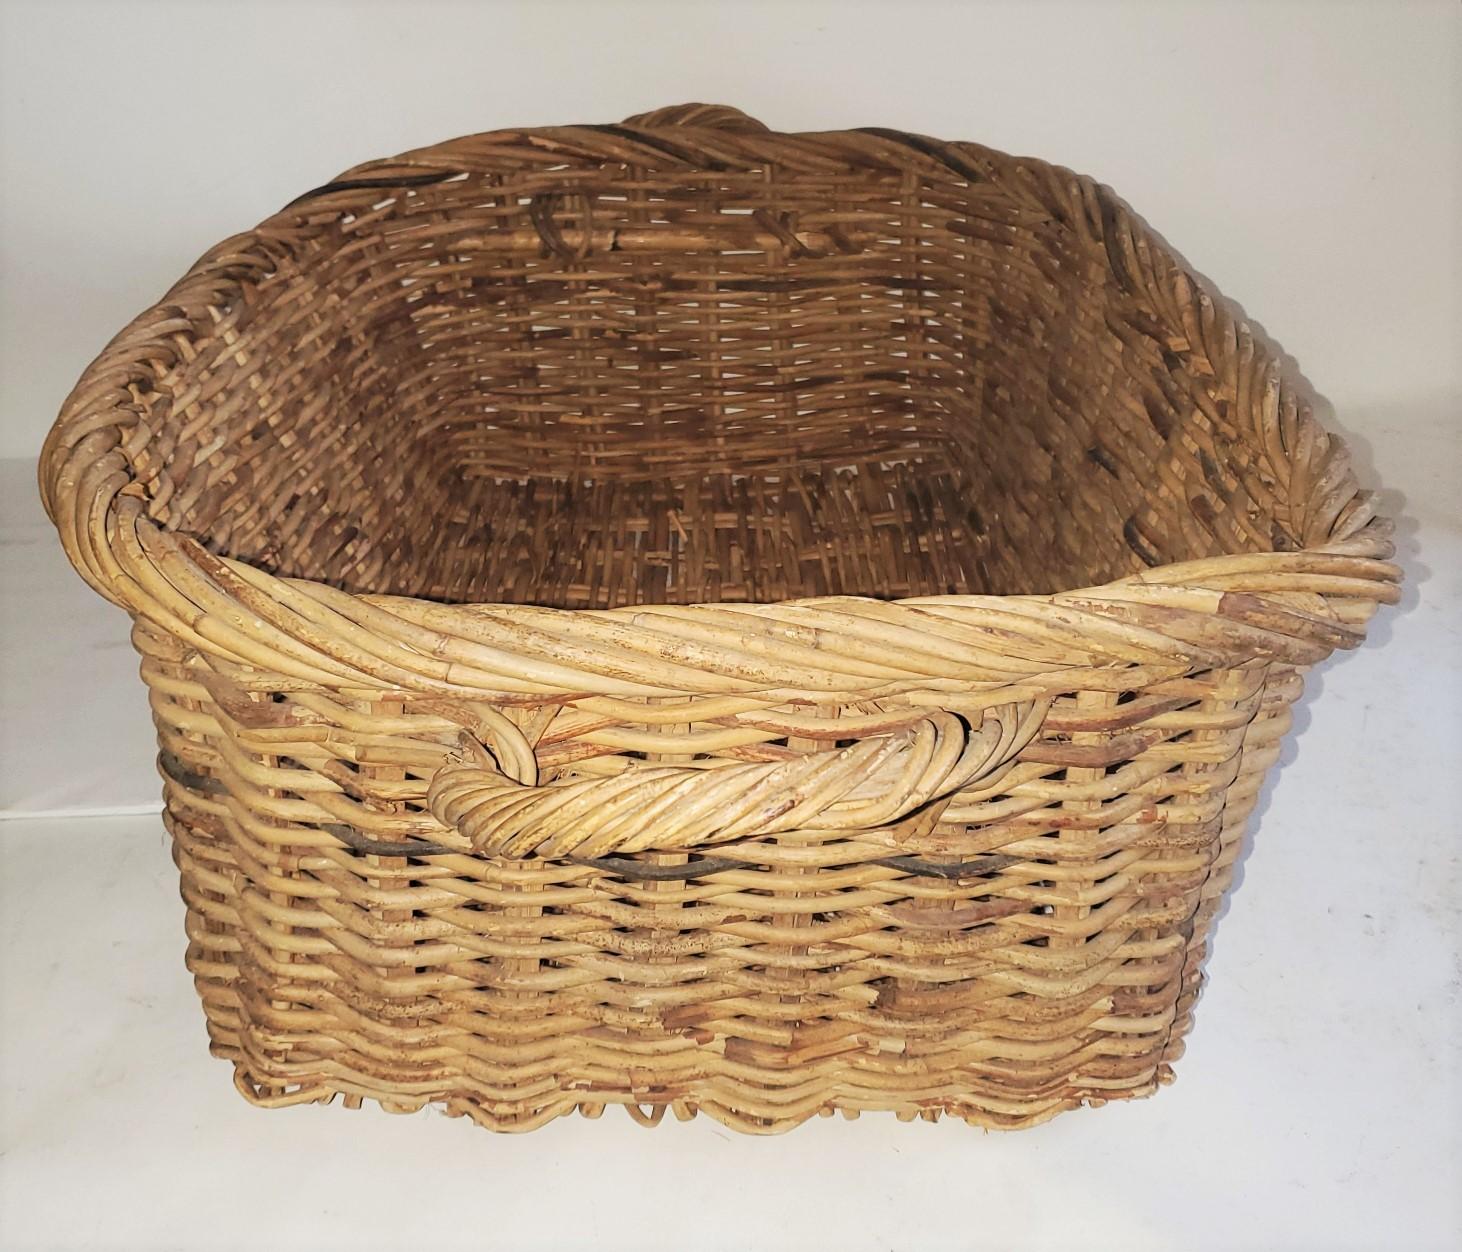 This fantastic double handled basket is in good condition and could handle a bunch of fruit or bagged bread. The condition is very good. A great display piece for a kitchen or retail store. In very nice condition.